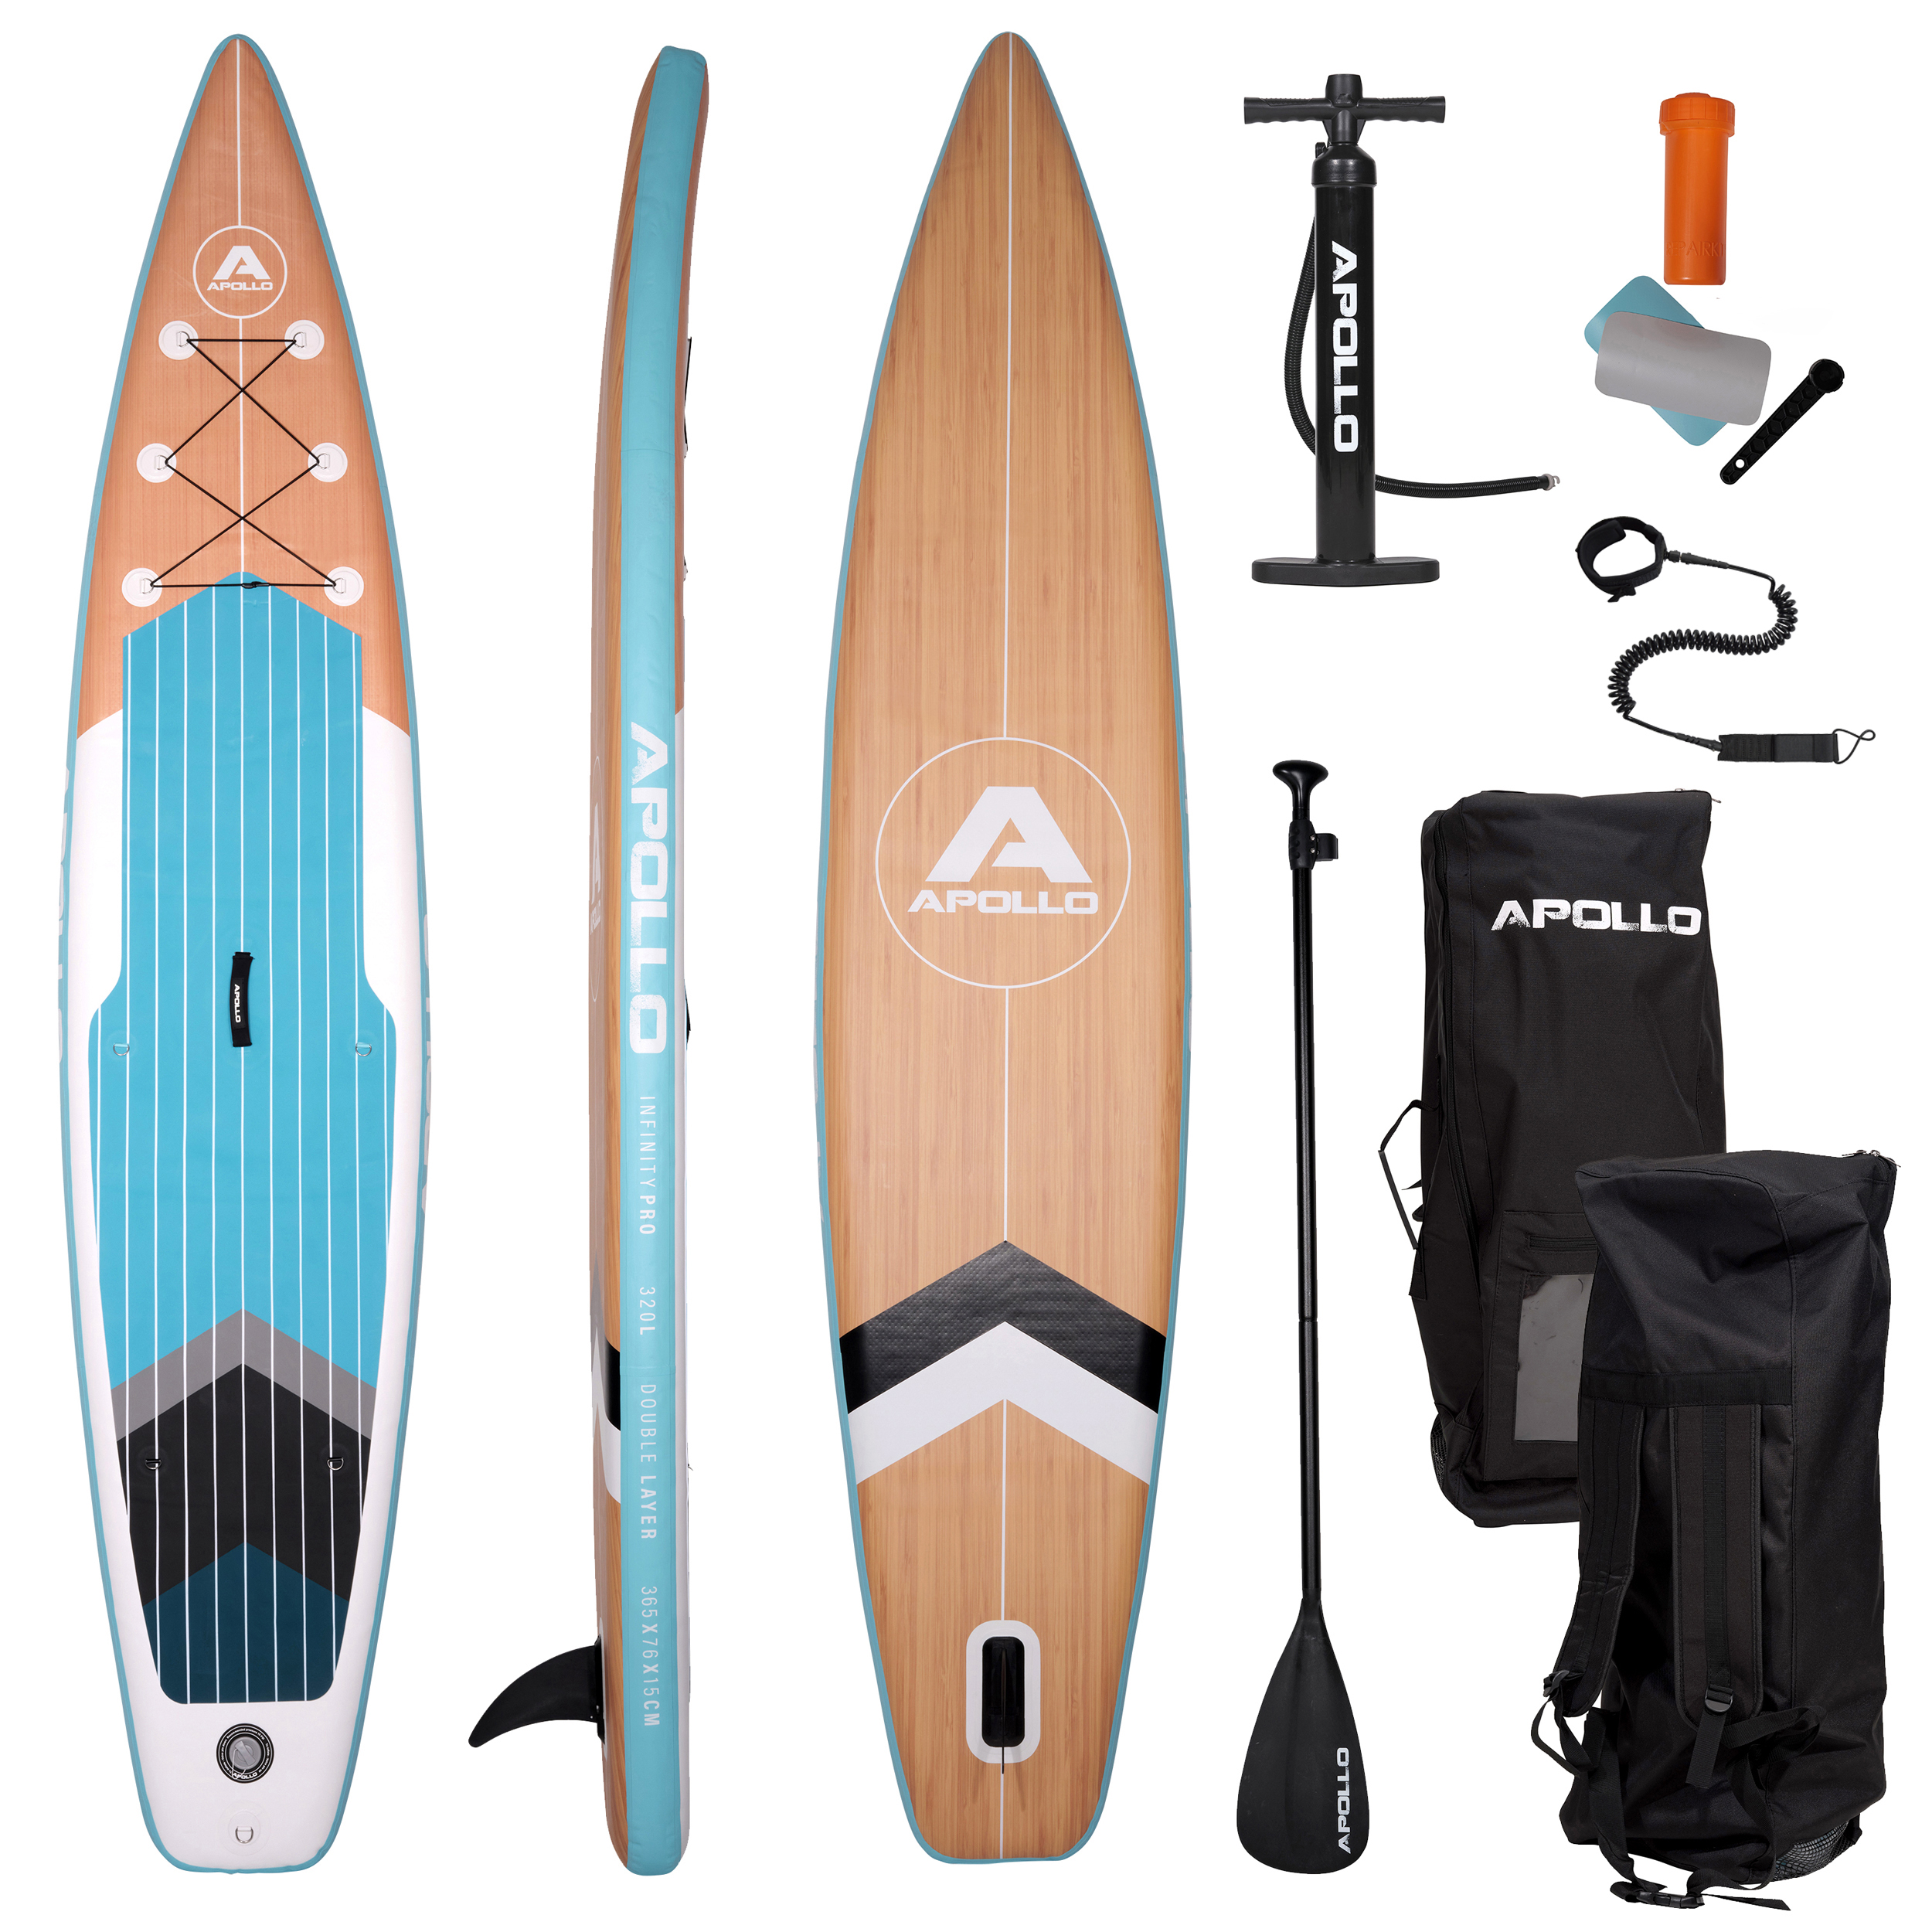 Apollo SUP Board, Stand Up Paddle Board Komplettset "INFINITY PRO" 3,65 m